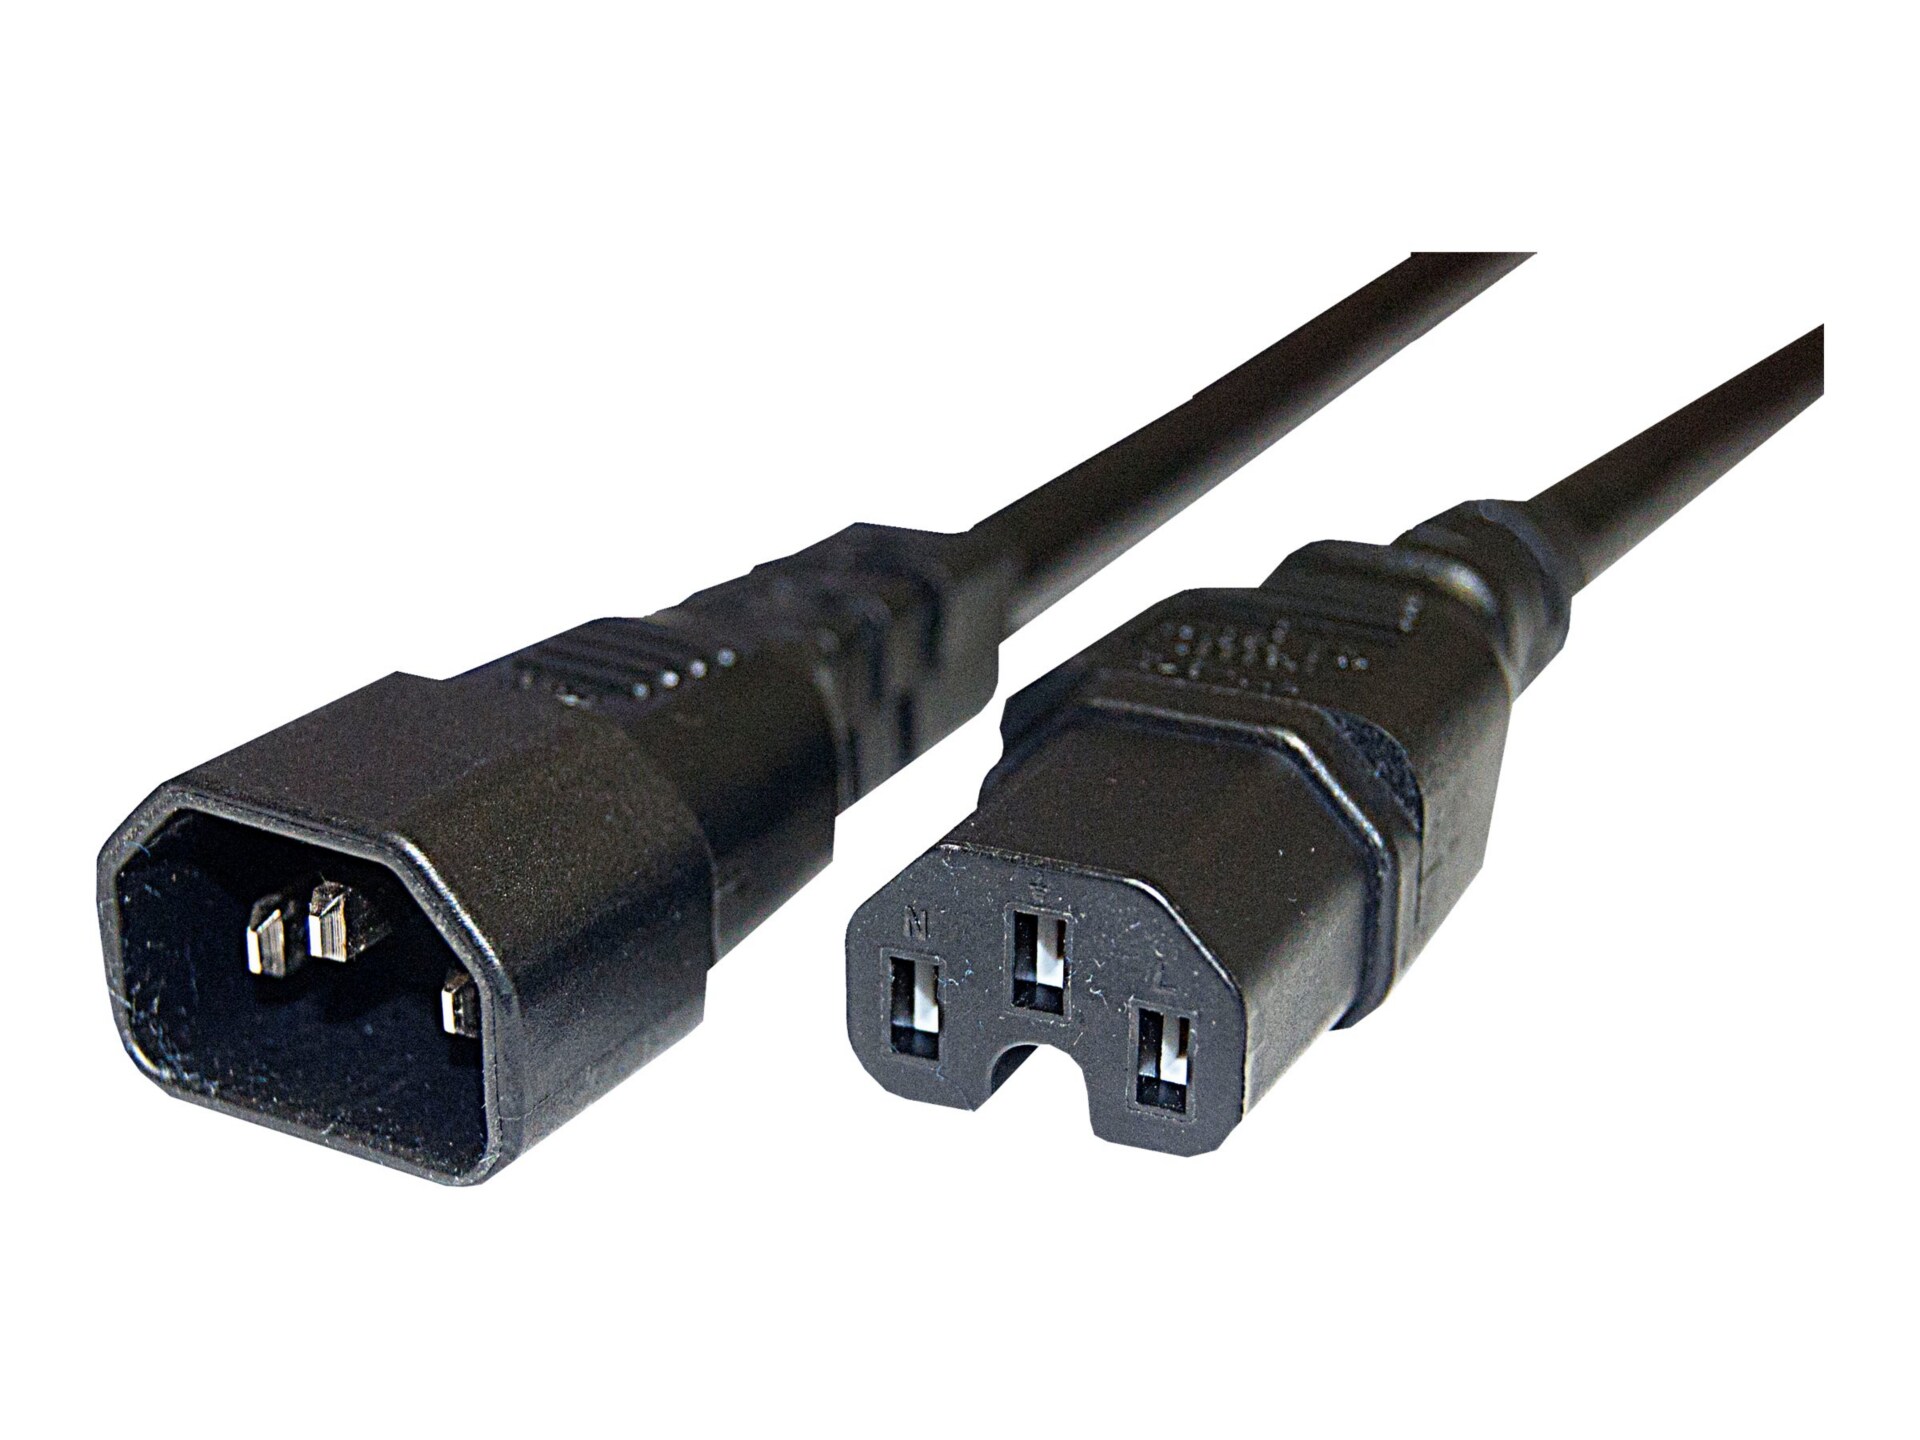 APC power extension cable - 4 ft